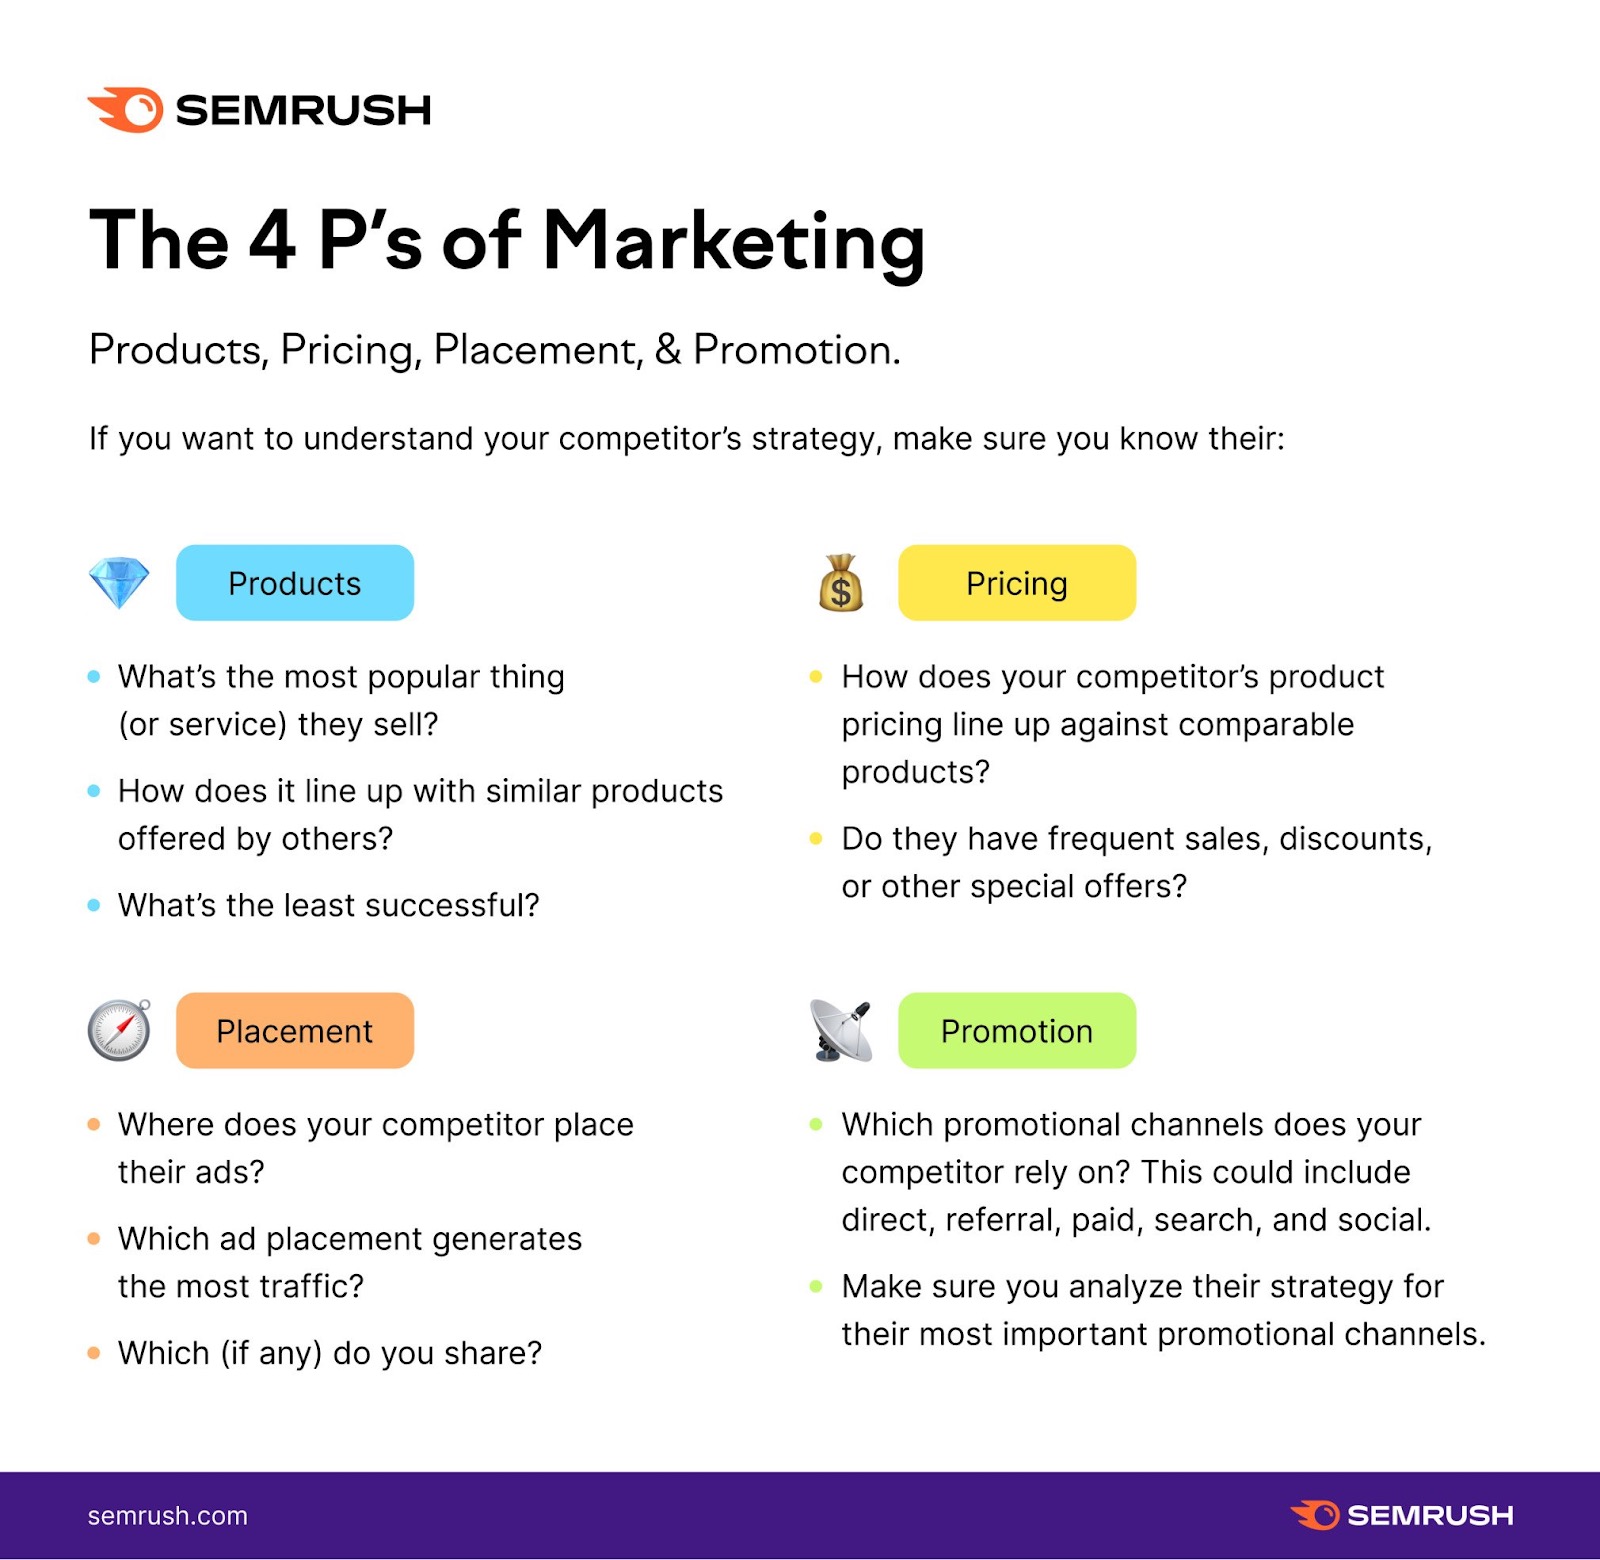 The 4 Ps of marketing explained